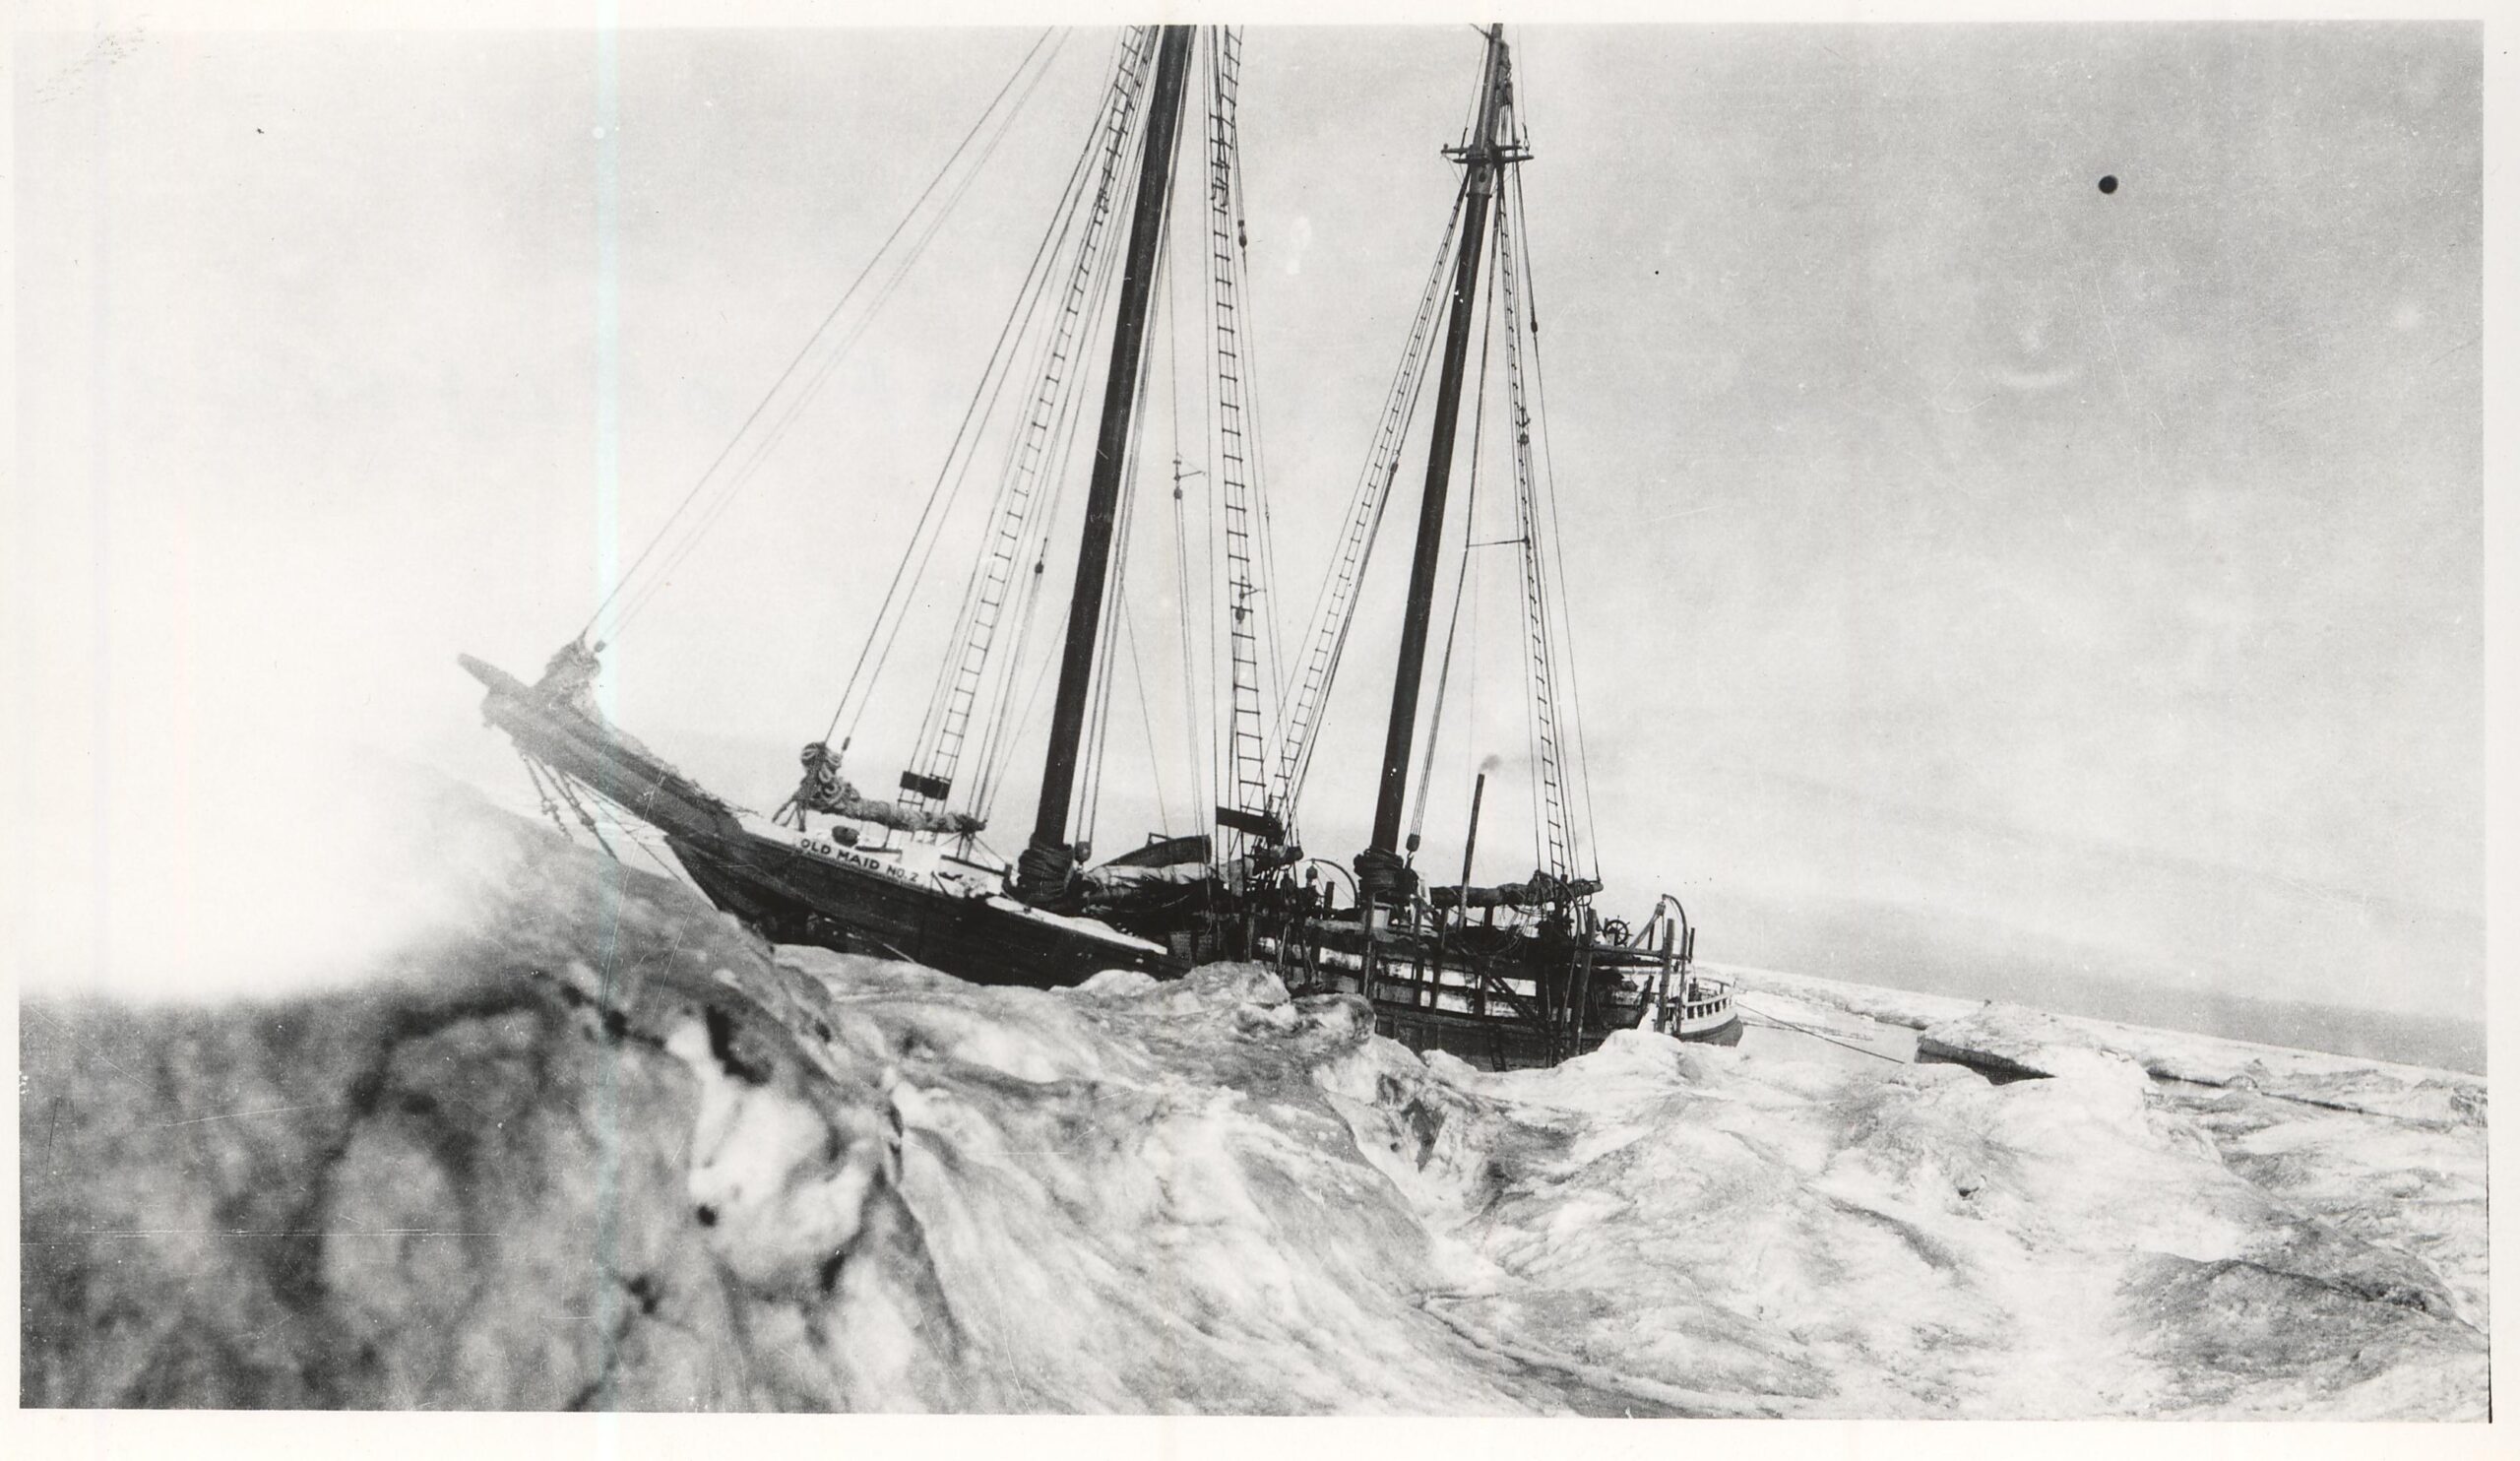 A black in white photo of Maid of Olreans trapped in Arctic ice.